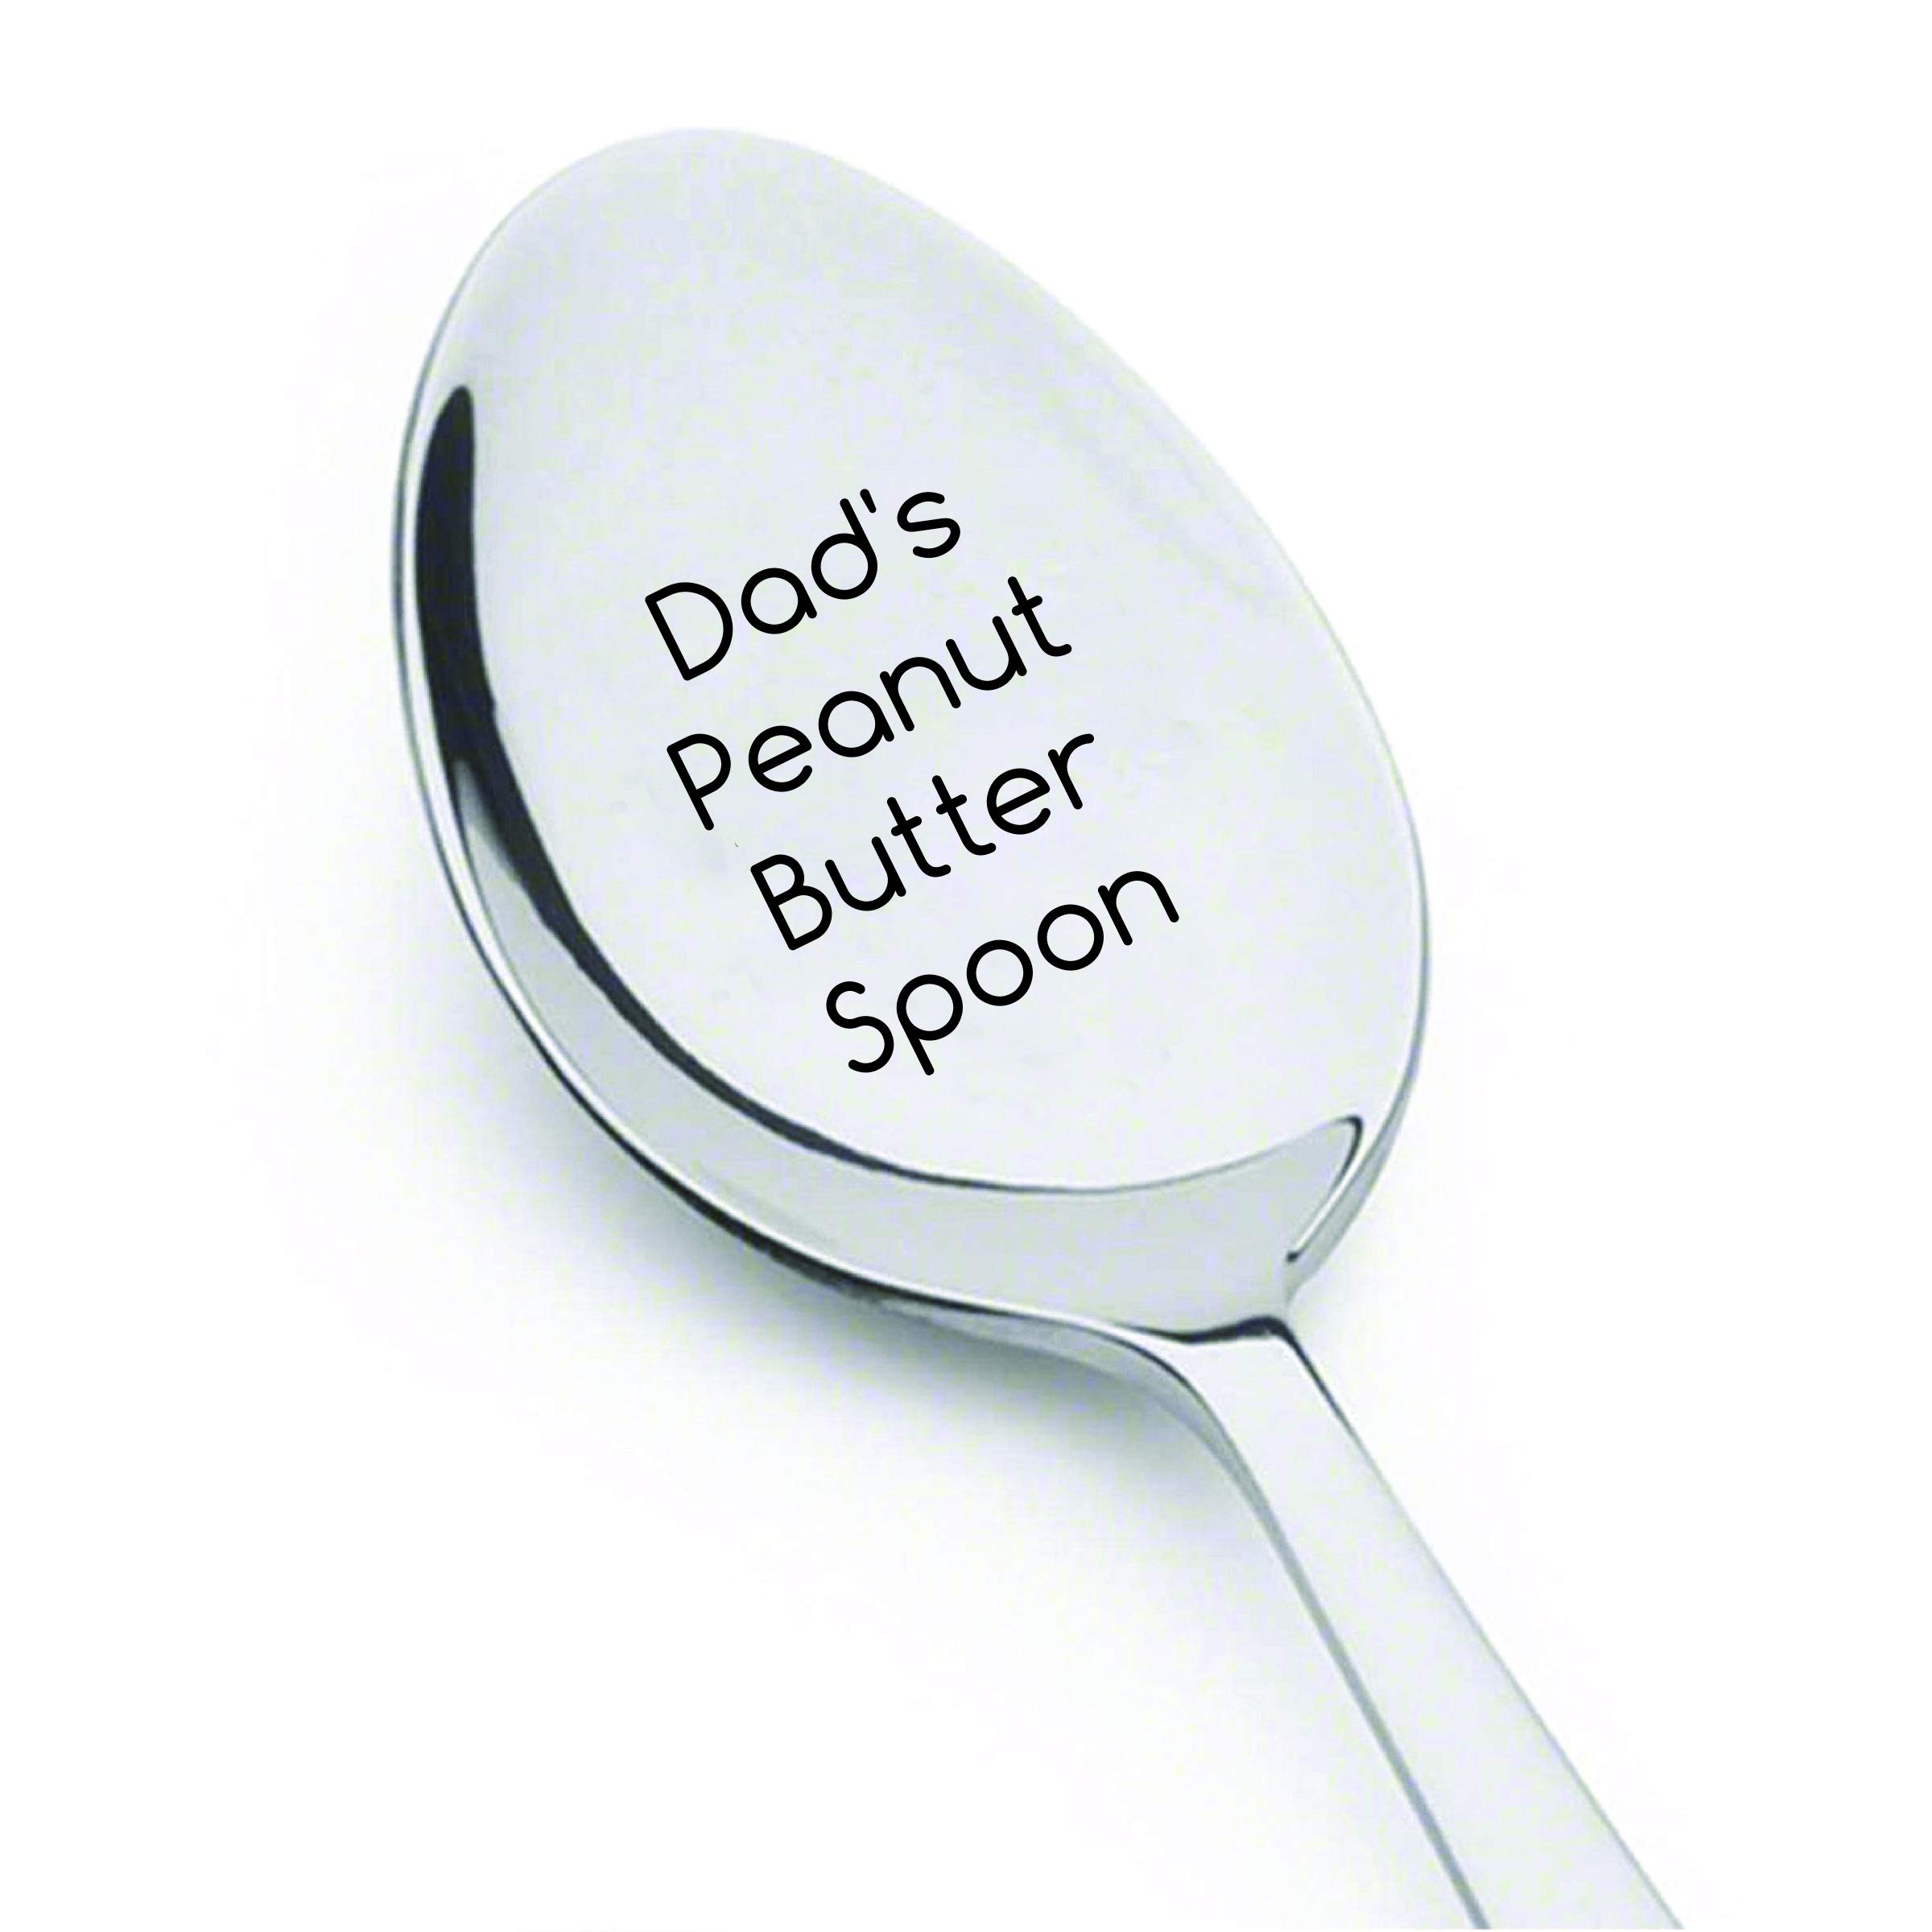 SS SPECIALTY STYLES Dads Peanut Butter Engraved Stainless Steel Spoon Token Of Love gifts For Dad On Fathers Day Birthday Anniversary Specia